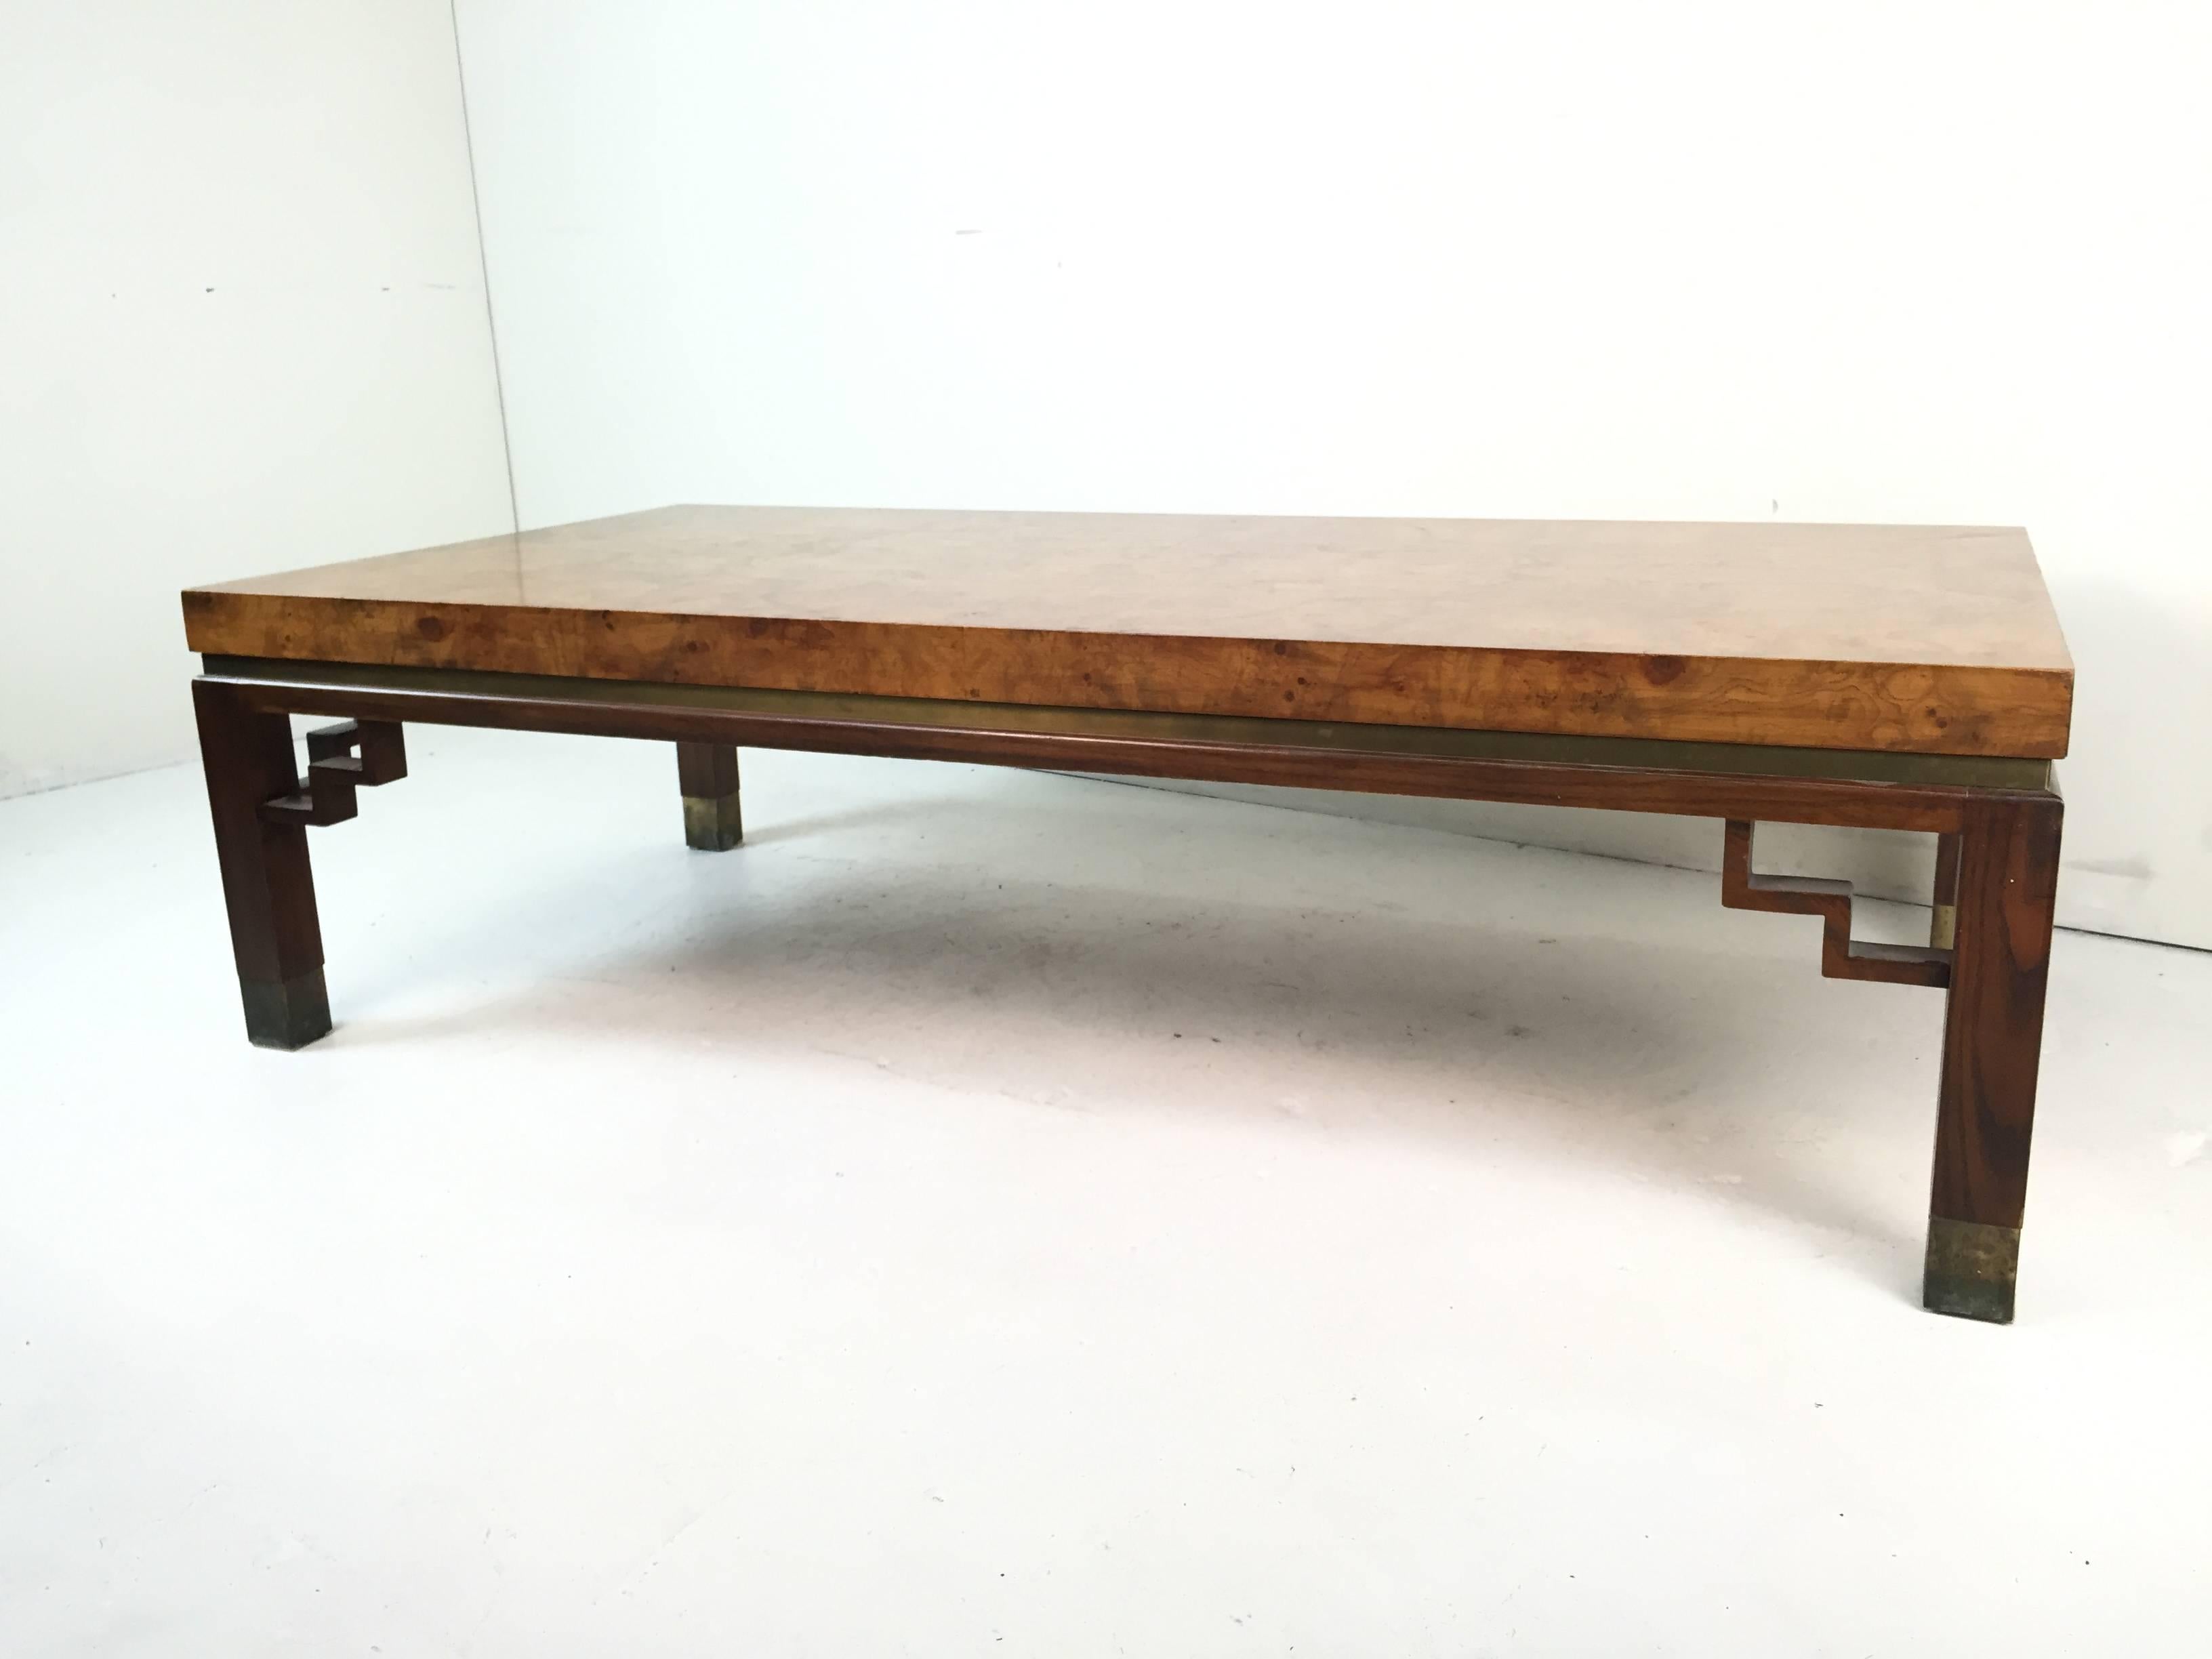 This handsome table is extremely well built and features a beautiful matchbook burl wood top with brass accents and rosewood legs finished with brass sabots.